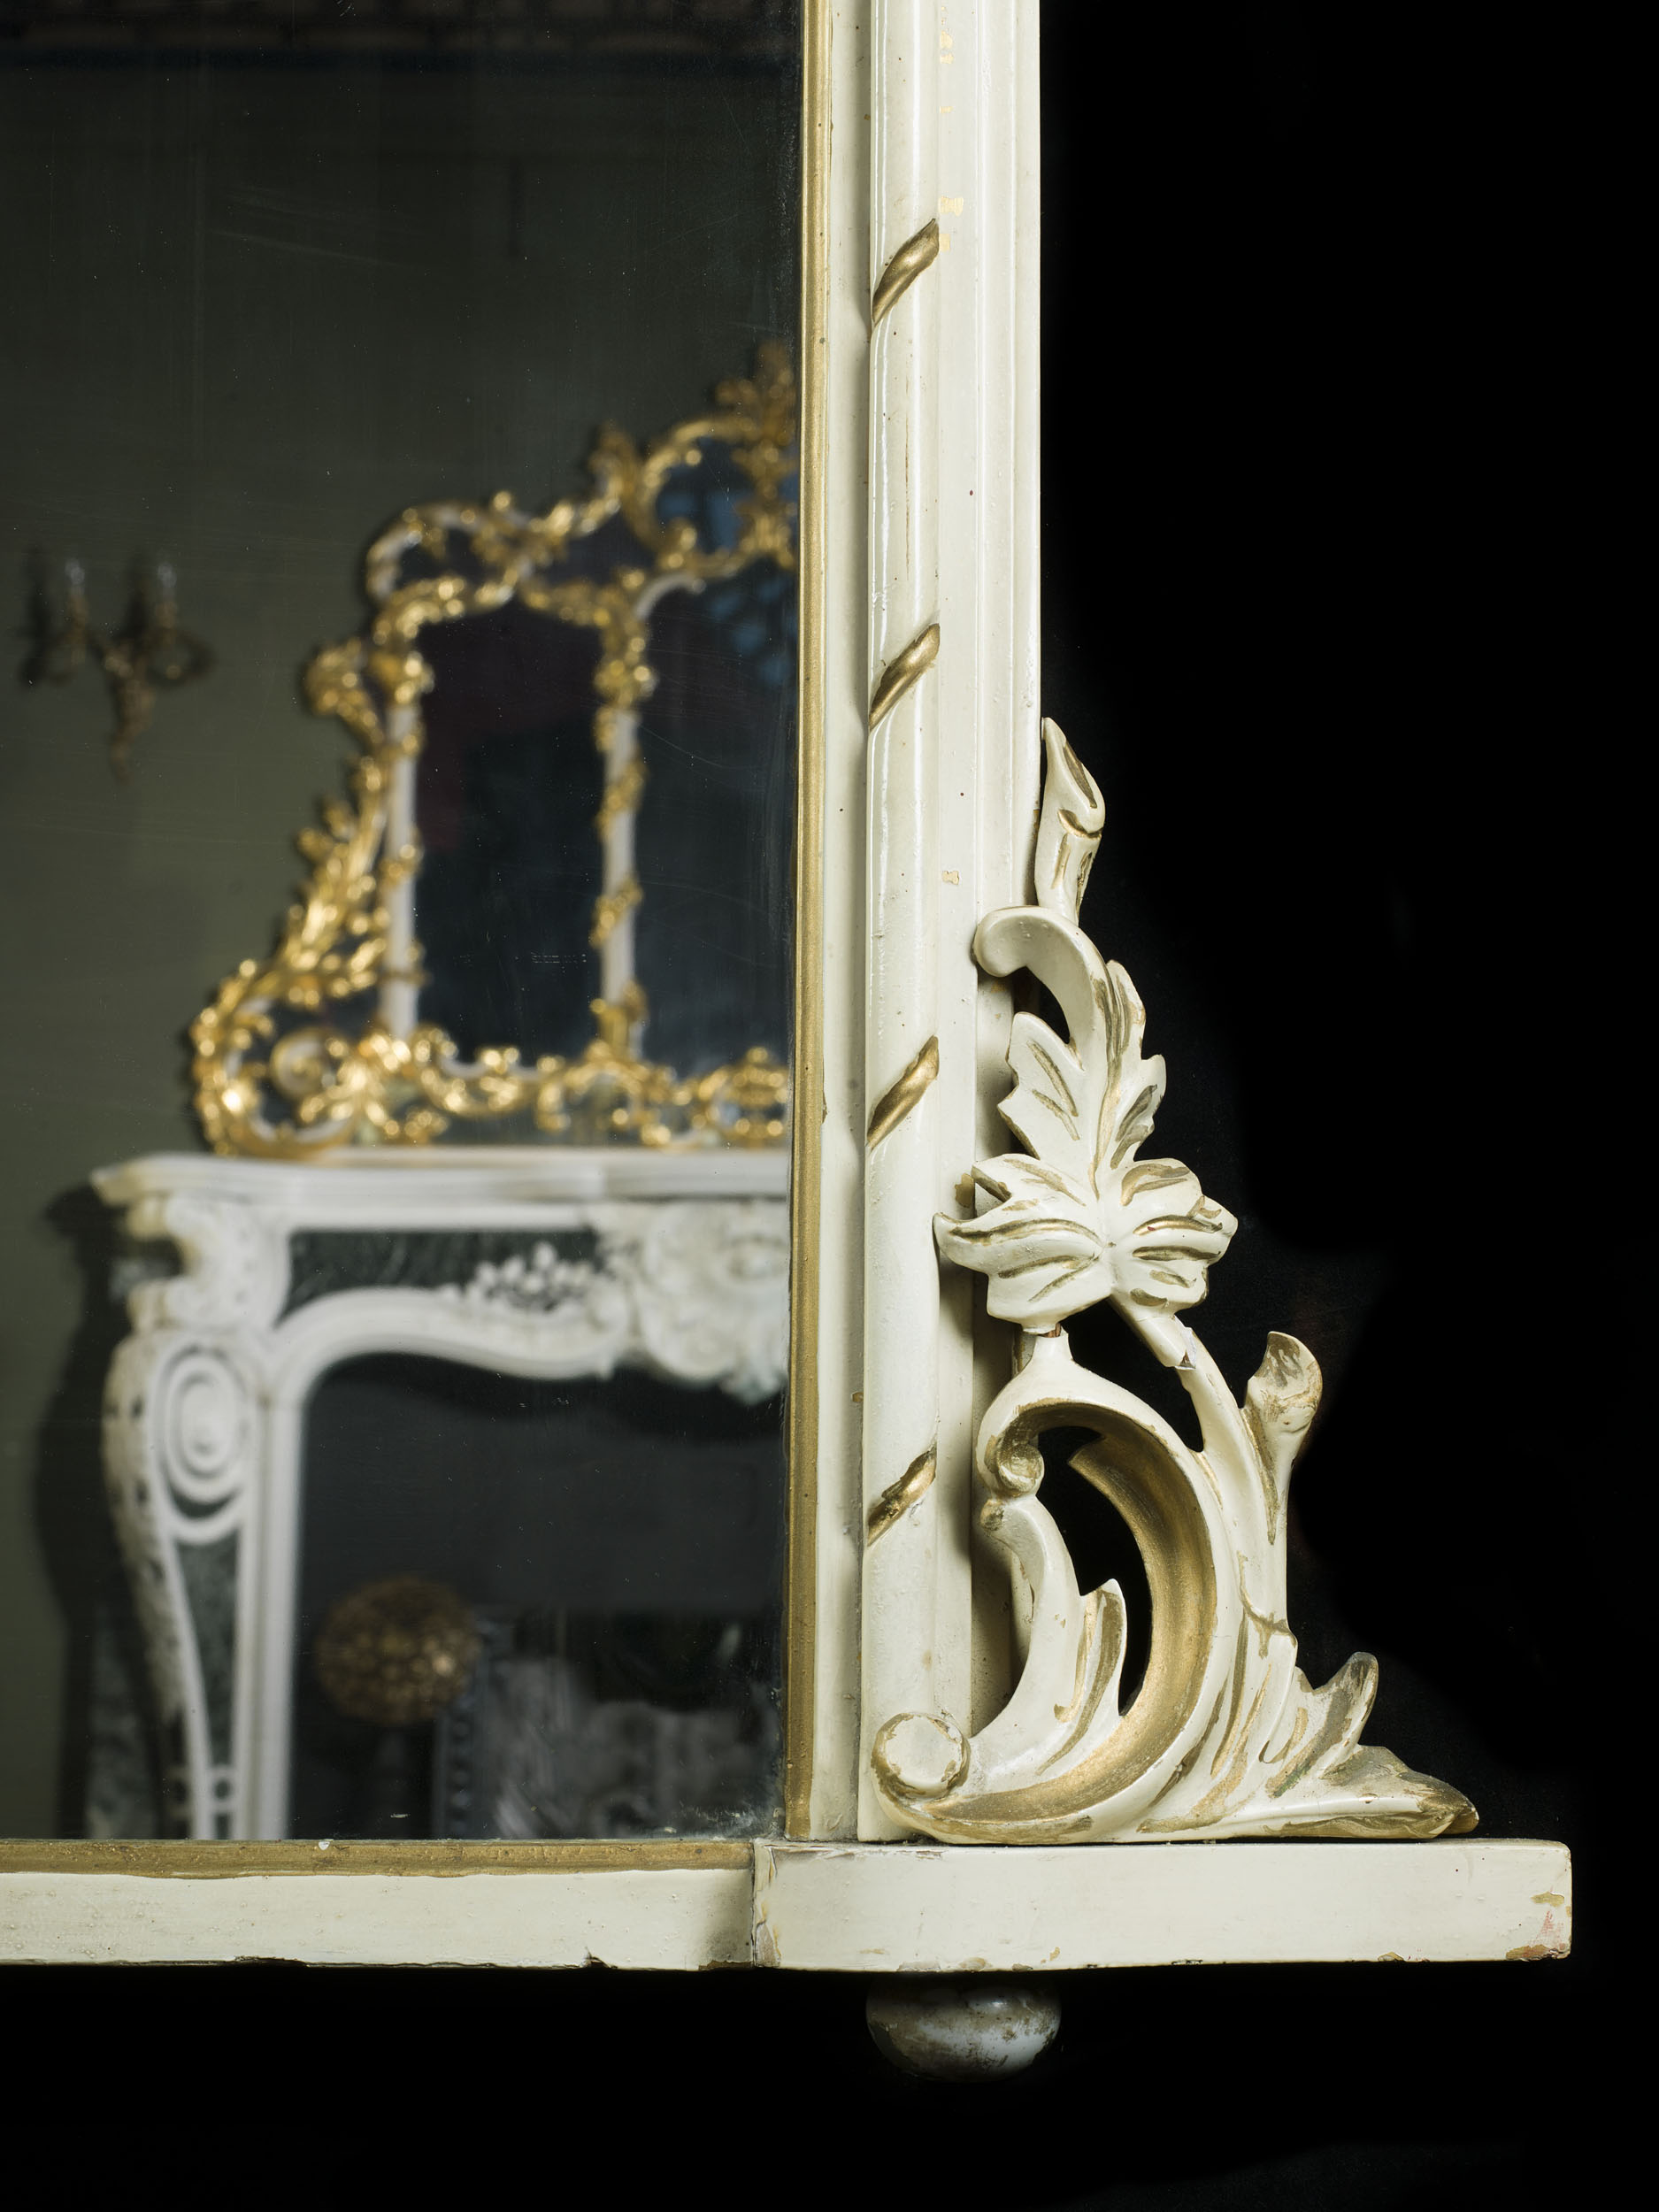 A Painted & Gilded Victorian Mirror